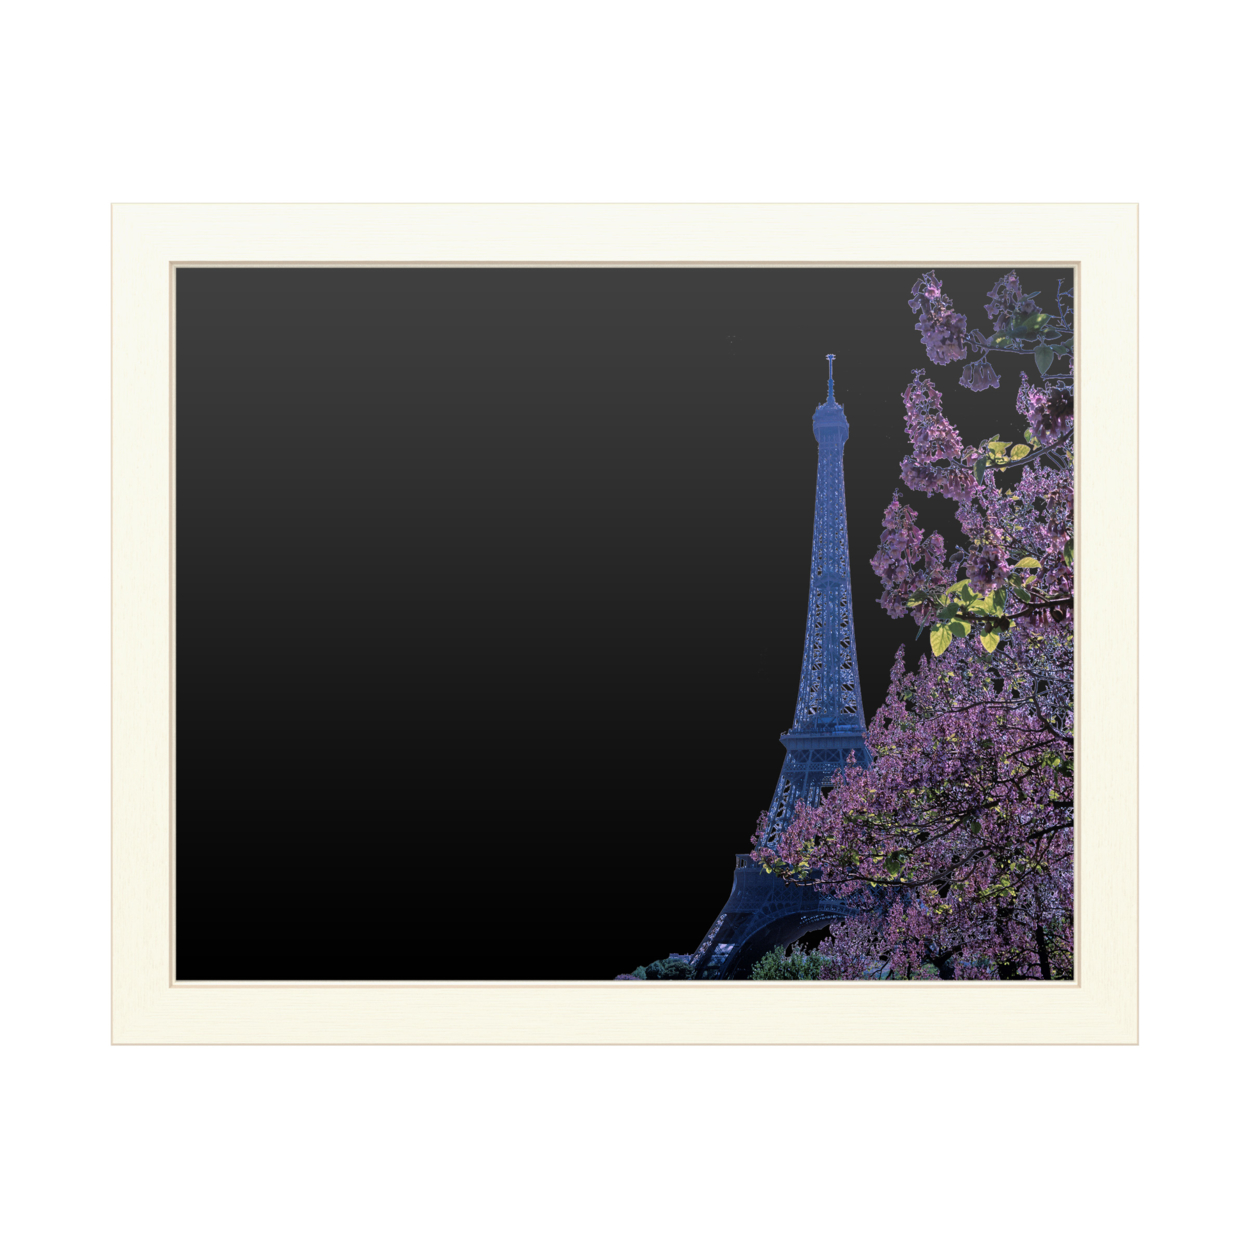 16 X 20 Chalk Board With Printed Artwork - Kathy Yates Eiffel Tower With Blossoms White Board - Ready To Hang Chalkboard